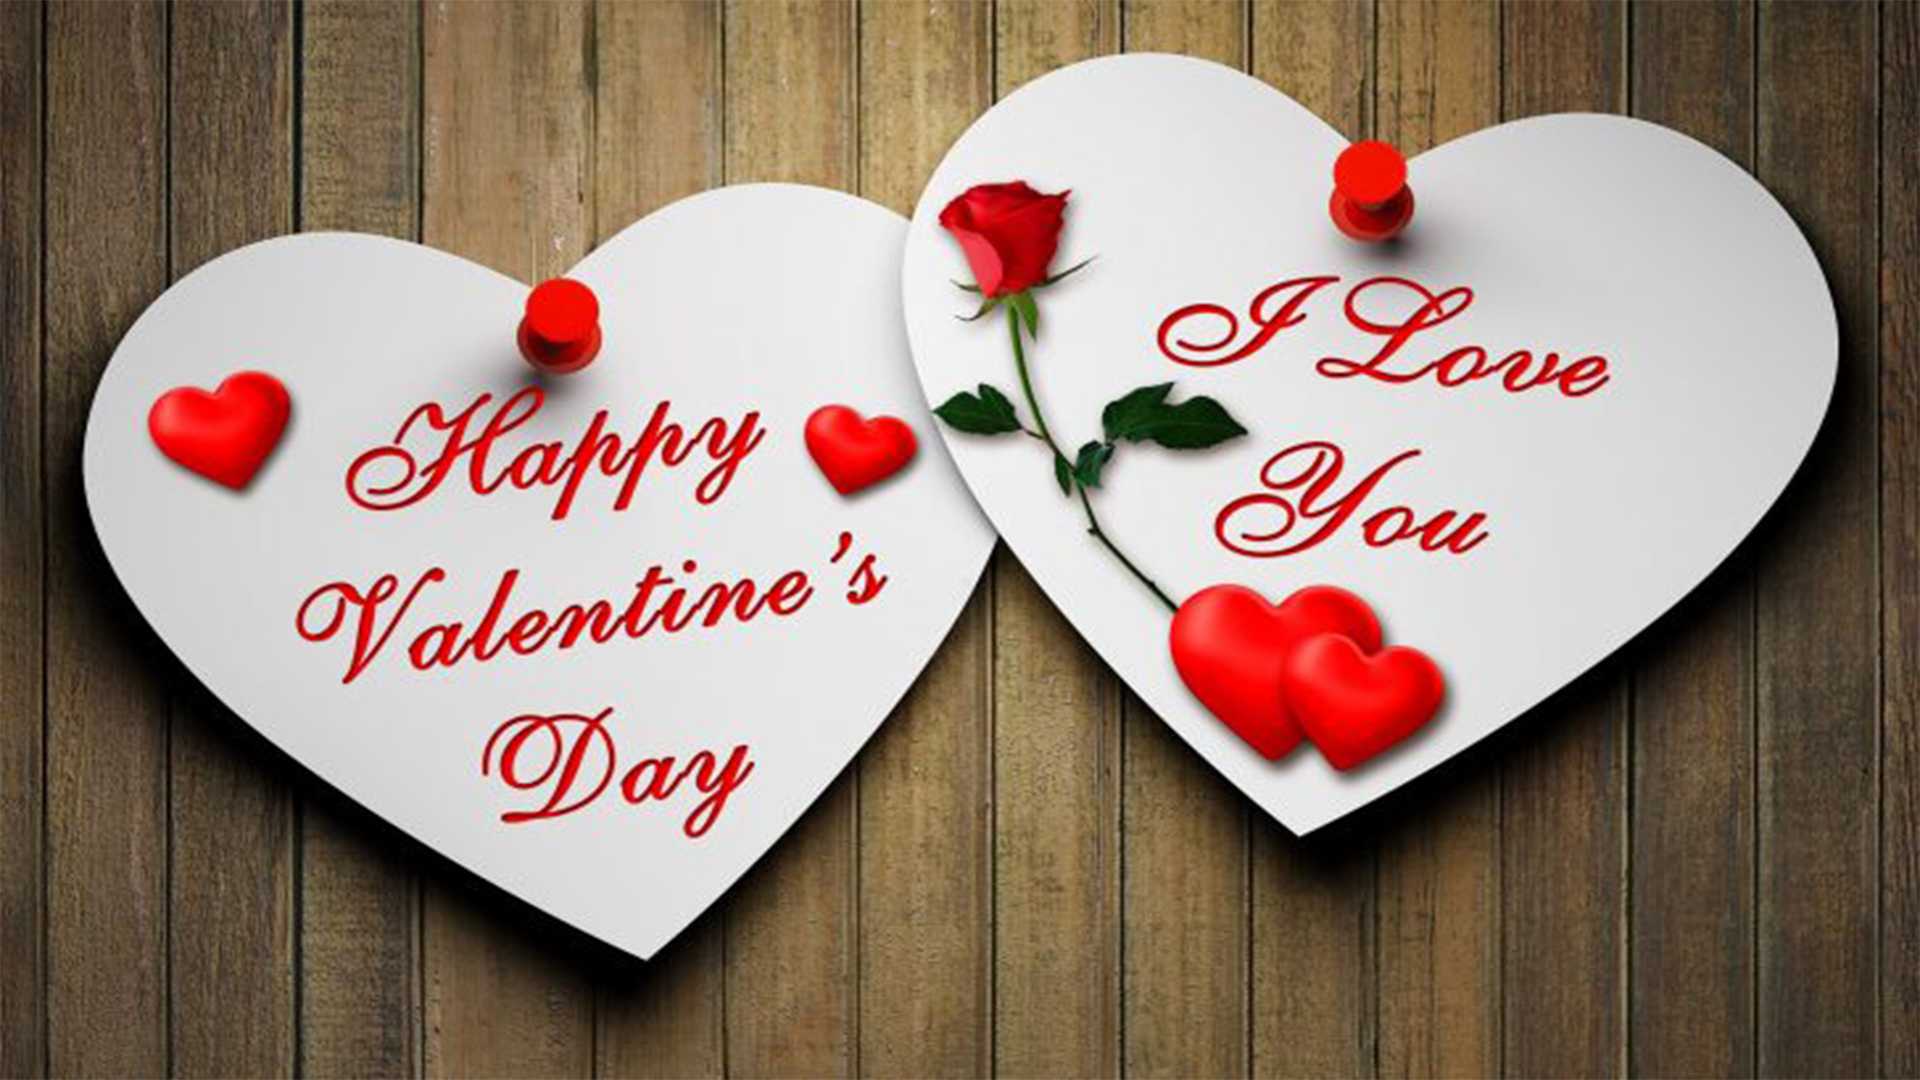 Happy Valentine's Day My Love Wallpapers - Wallpaper Cave